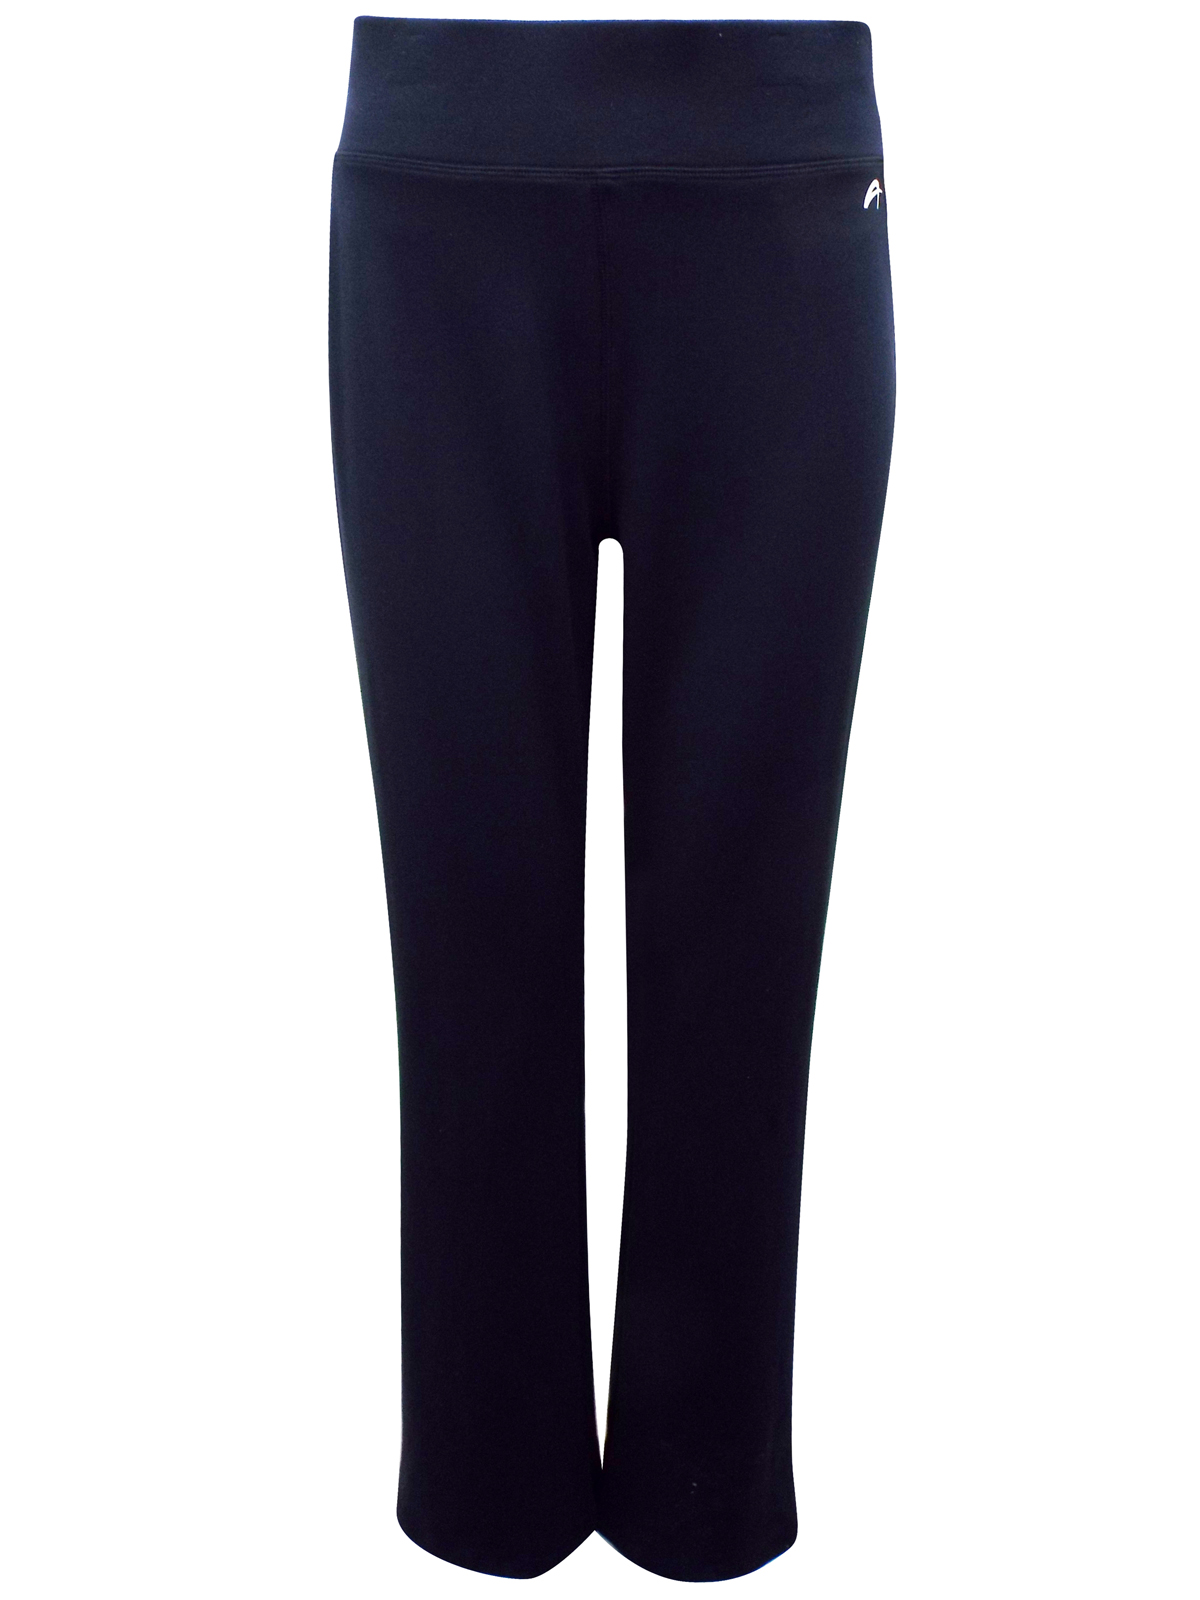 F&F - - BLACK Wide Waist Full Length Joggers - Size XSmall to Large